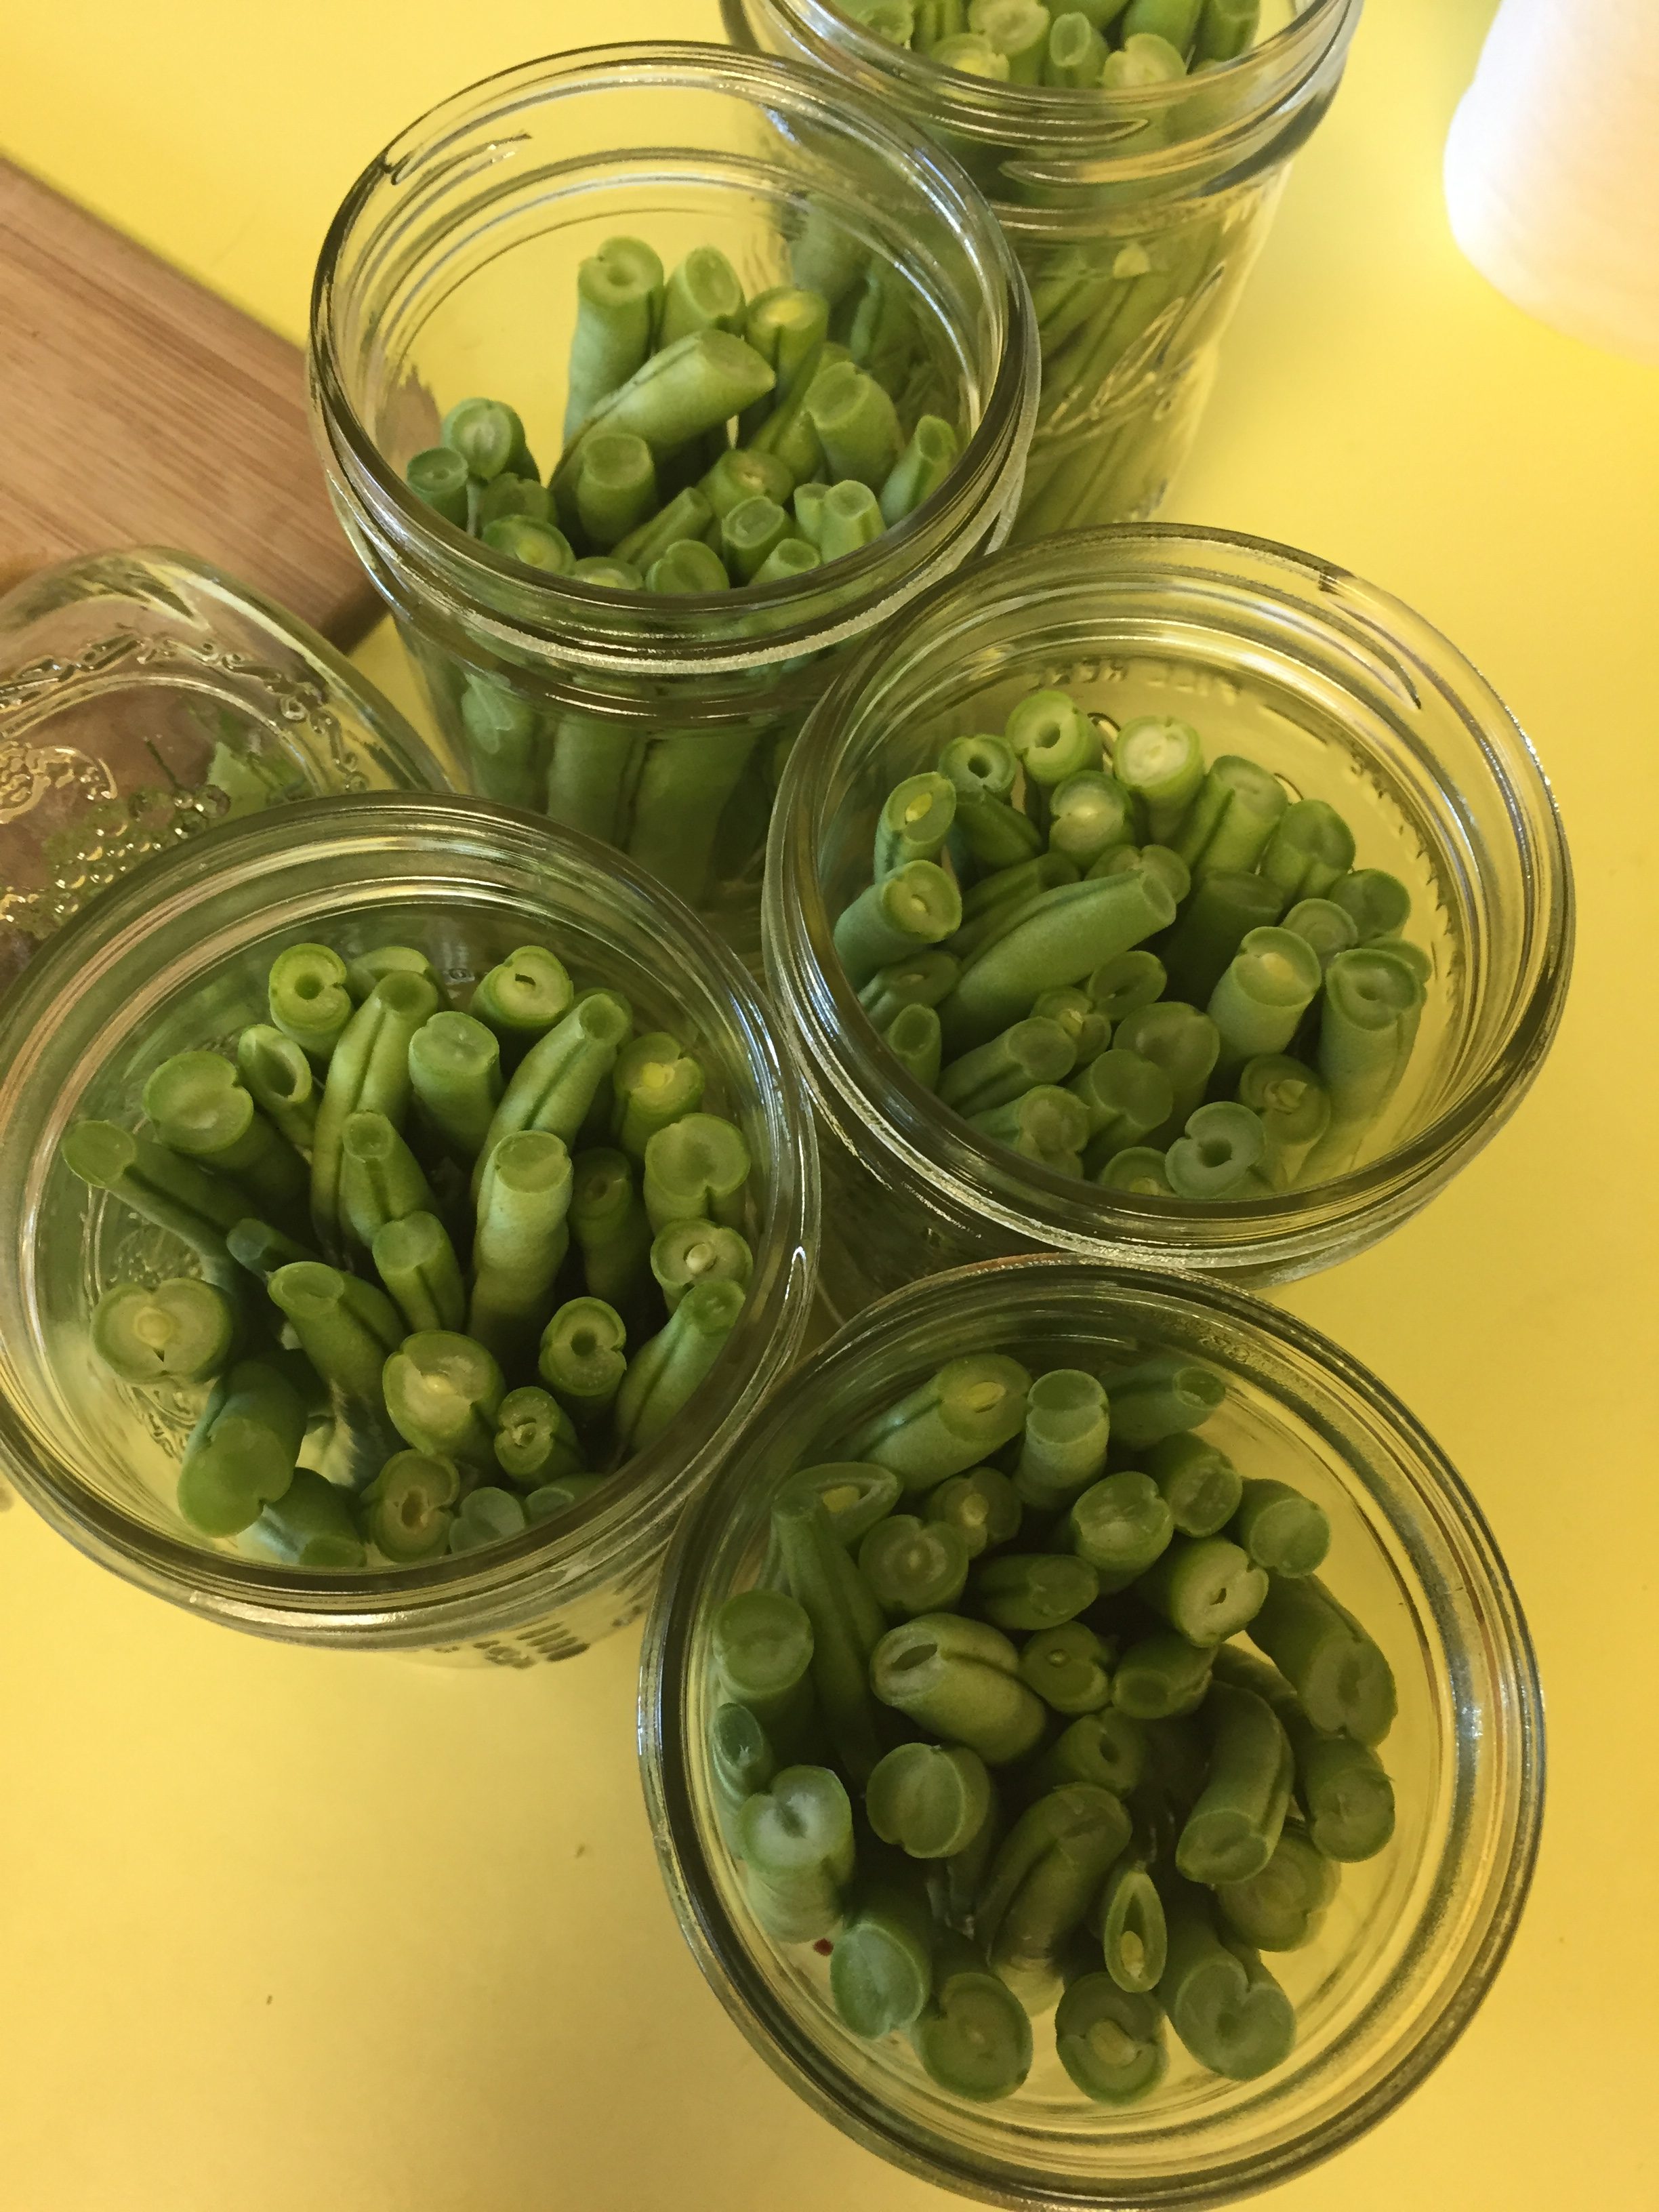 Grandma's Dilly Beans (Pickled Green Beans) • Oh Snap! Let's Eat! How Many Cans Is 4 Cups Of Green Beans